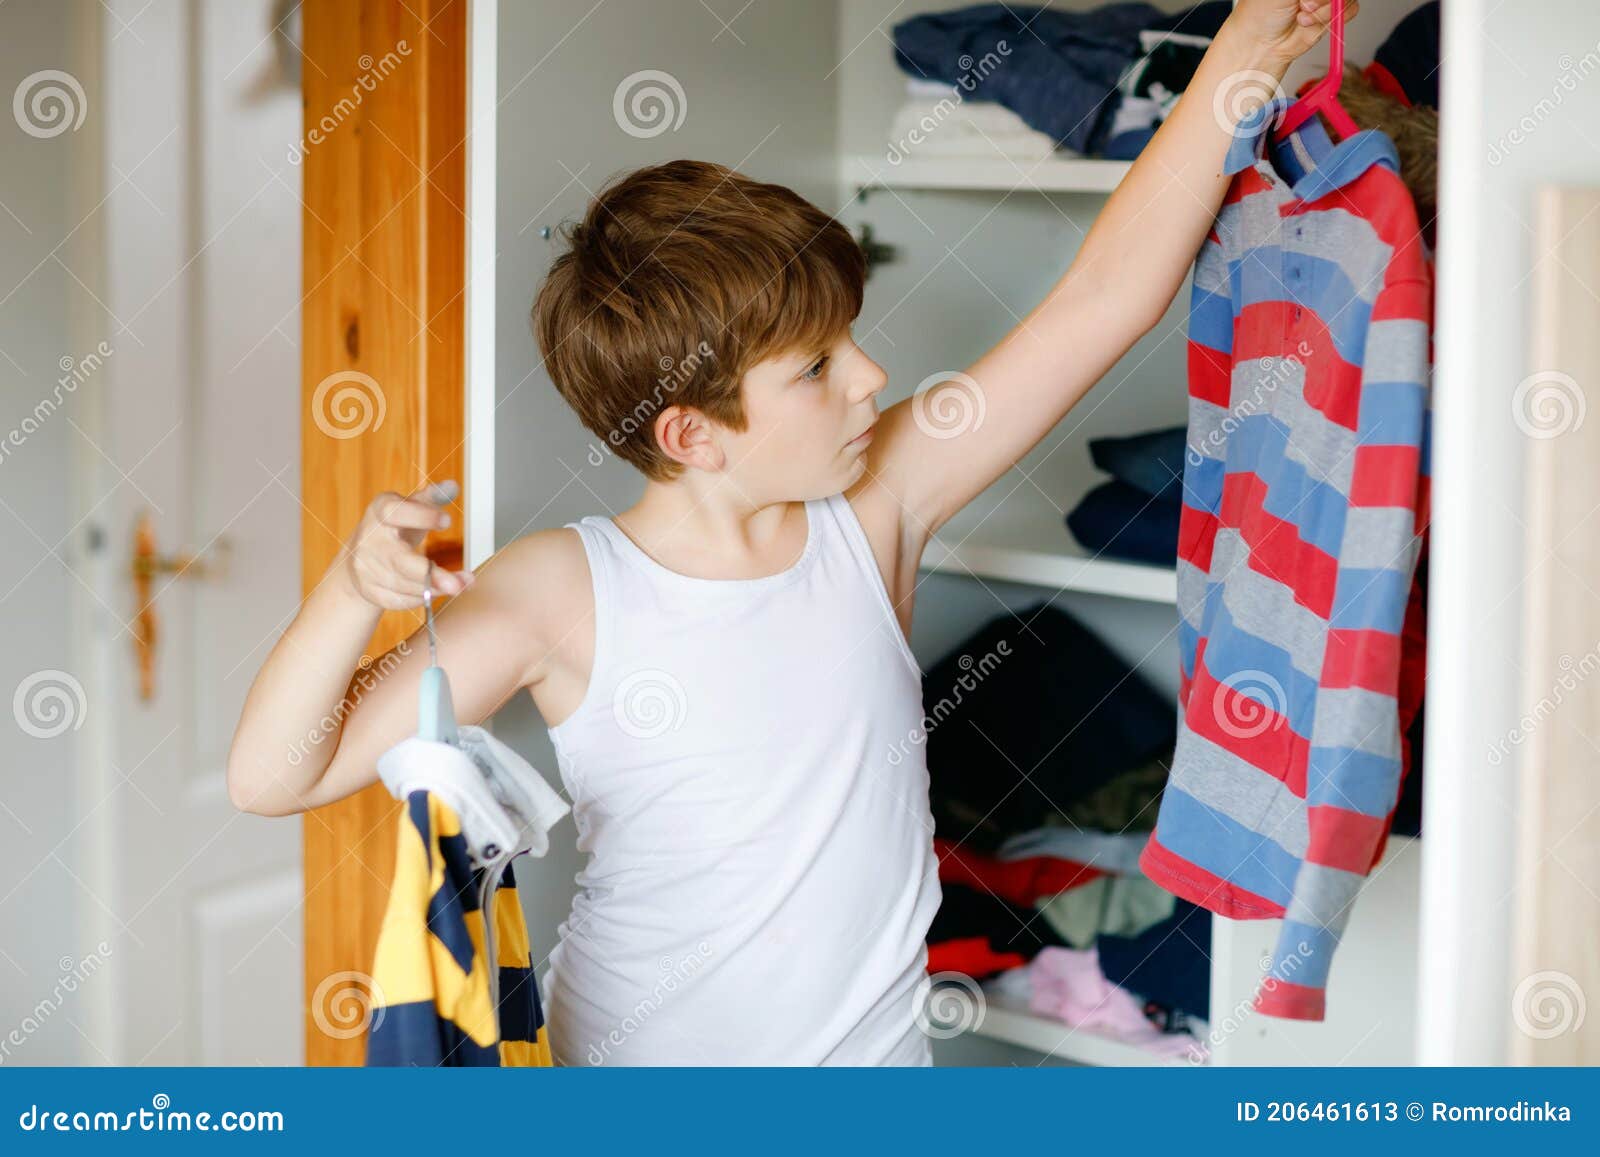 School Kid Boy Standing by Wardrobe with Clothes. Child Making Decision ...